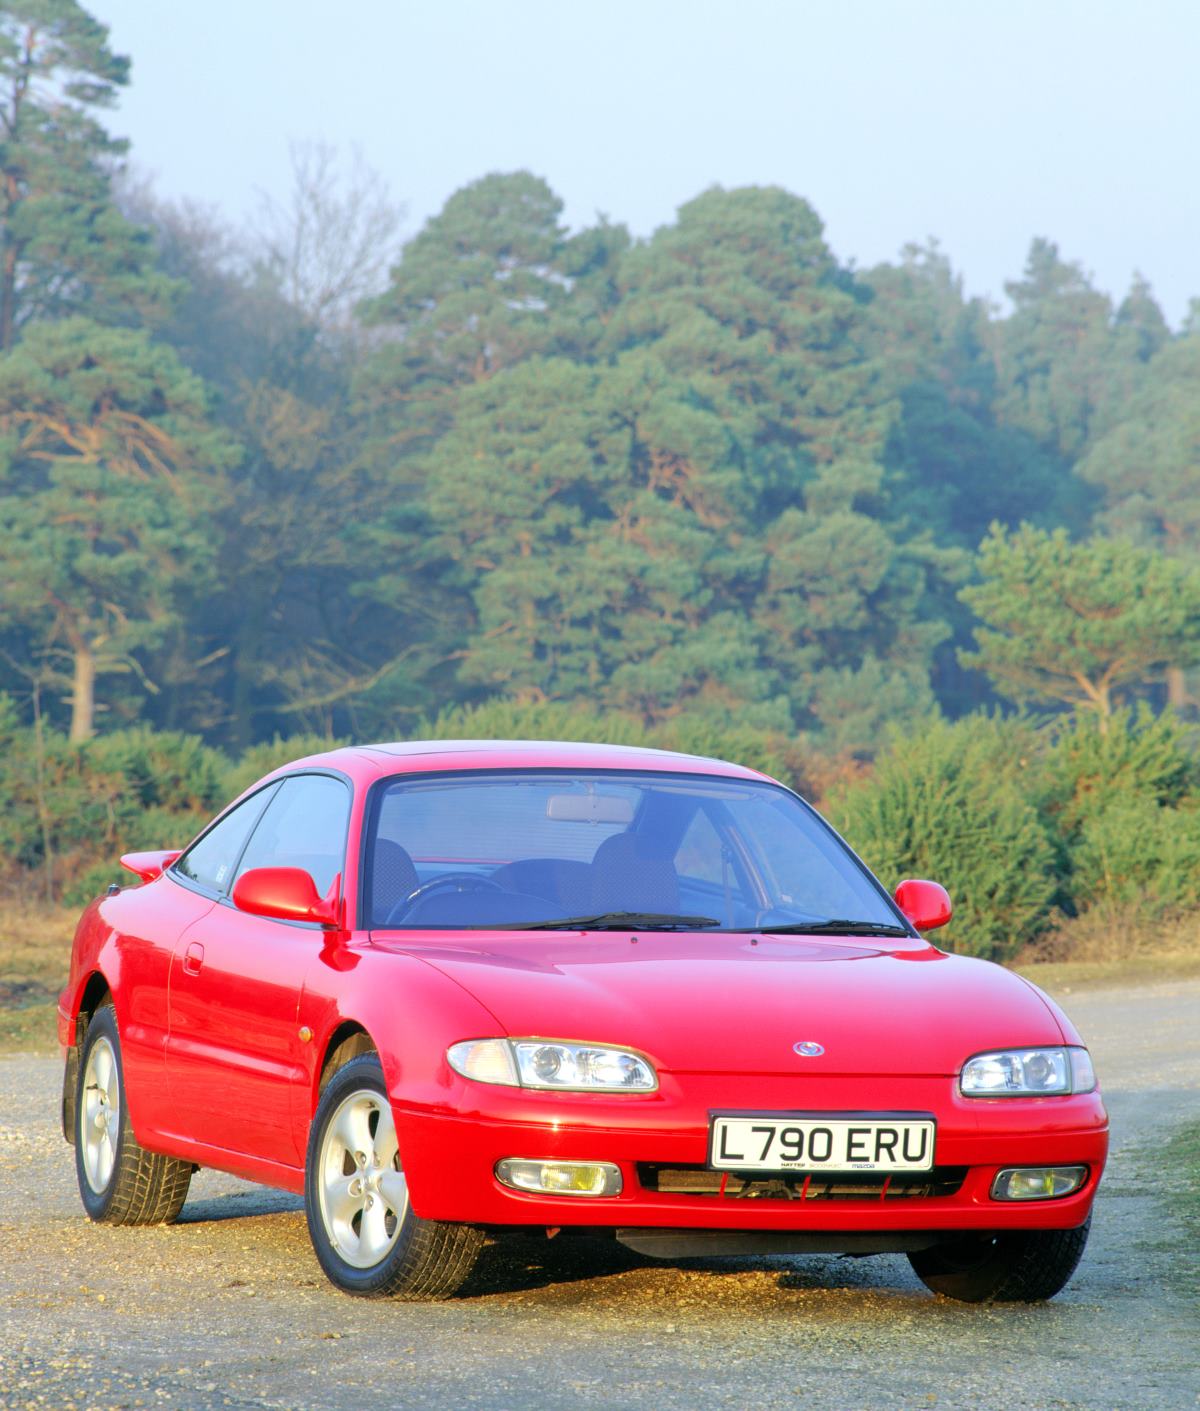 Mazda MX-6, the basis for the Ford Probe that almost replaced the Mustang